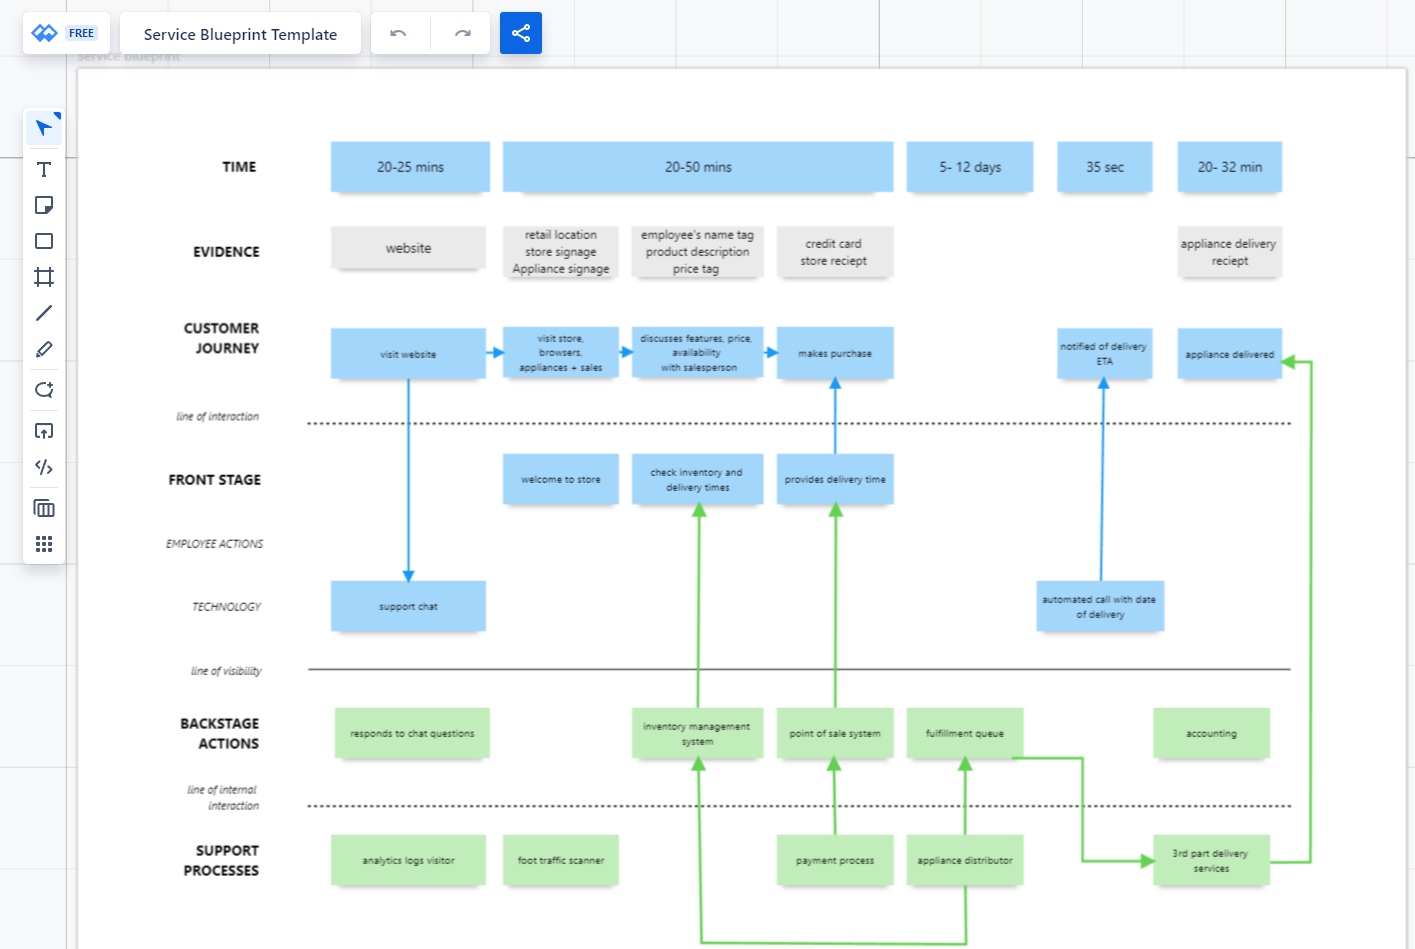 Service Blueprint Template by Whiteboards.io